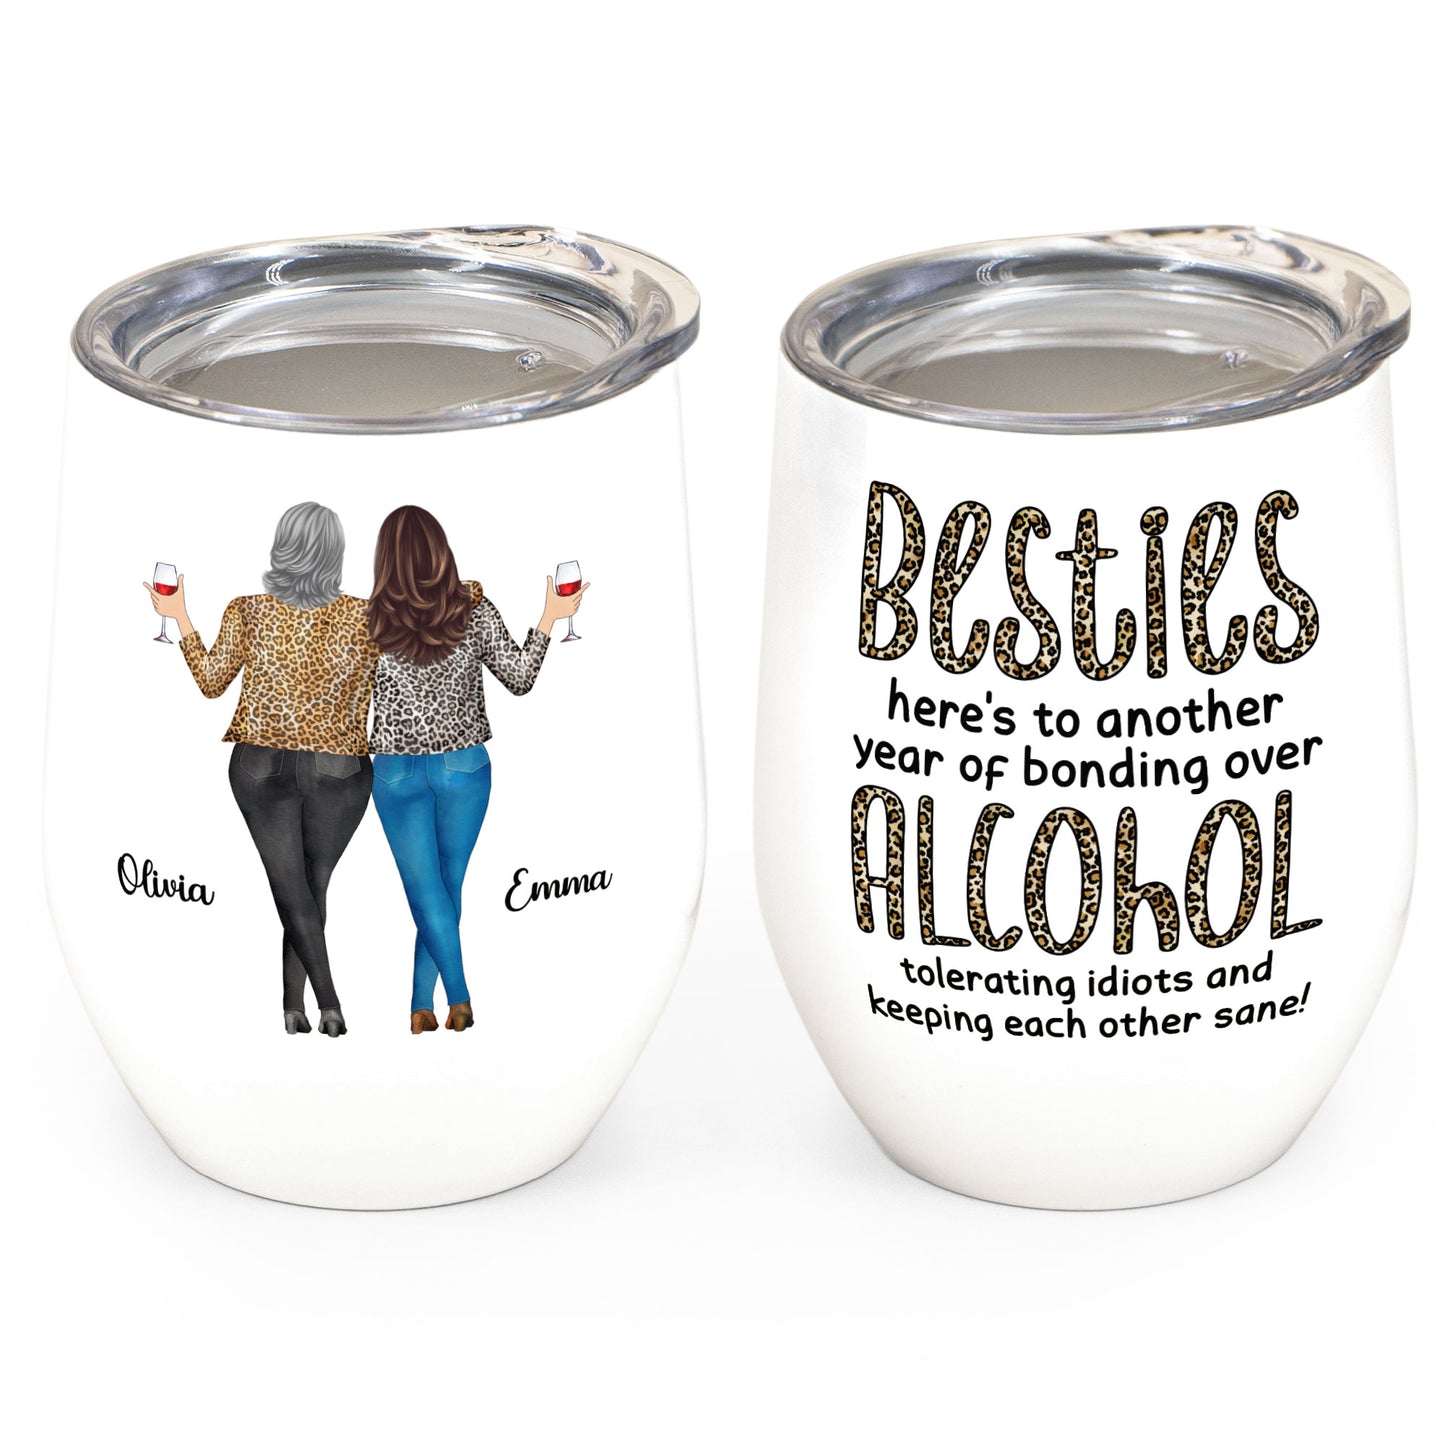 Besties, Alcohol Tolerating, Bonding Over, Keeping Each Other Sane - Personalized Wine Tumbler - Birthday, New Year Gift For Besties, Soul Sisters, Sistas, BFF, Friends - Leopard Pattern Jacket Woman